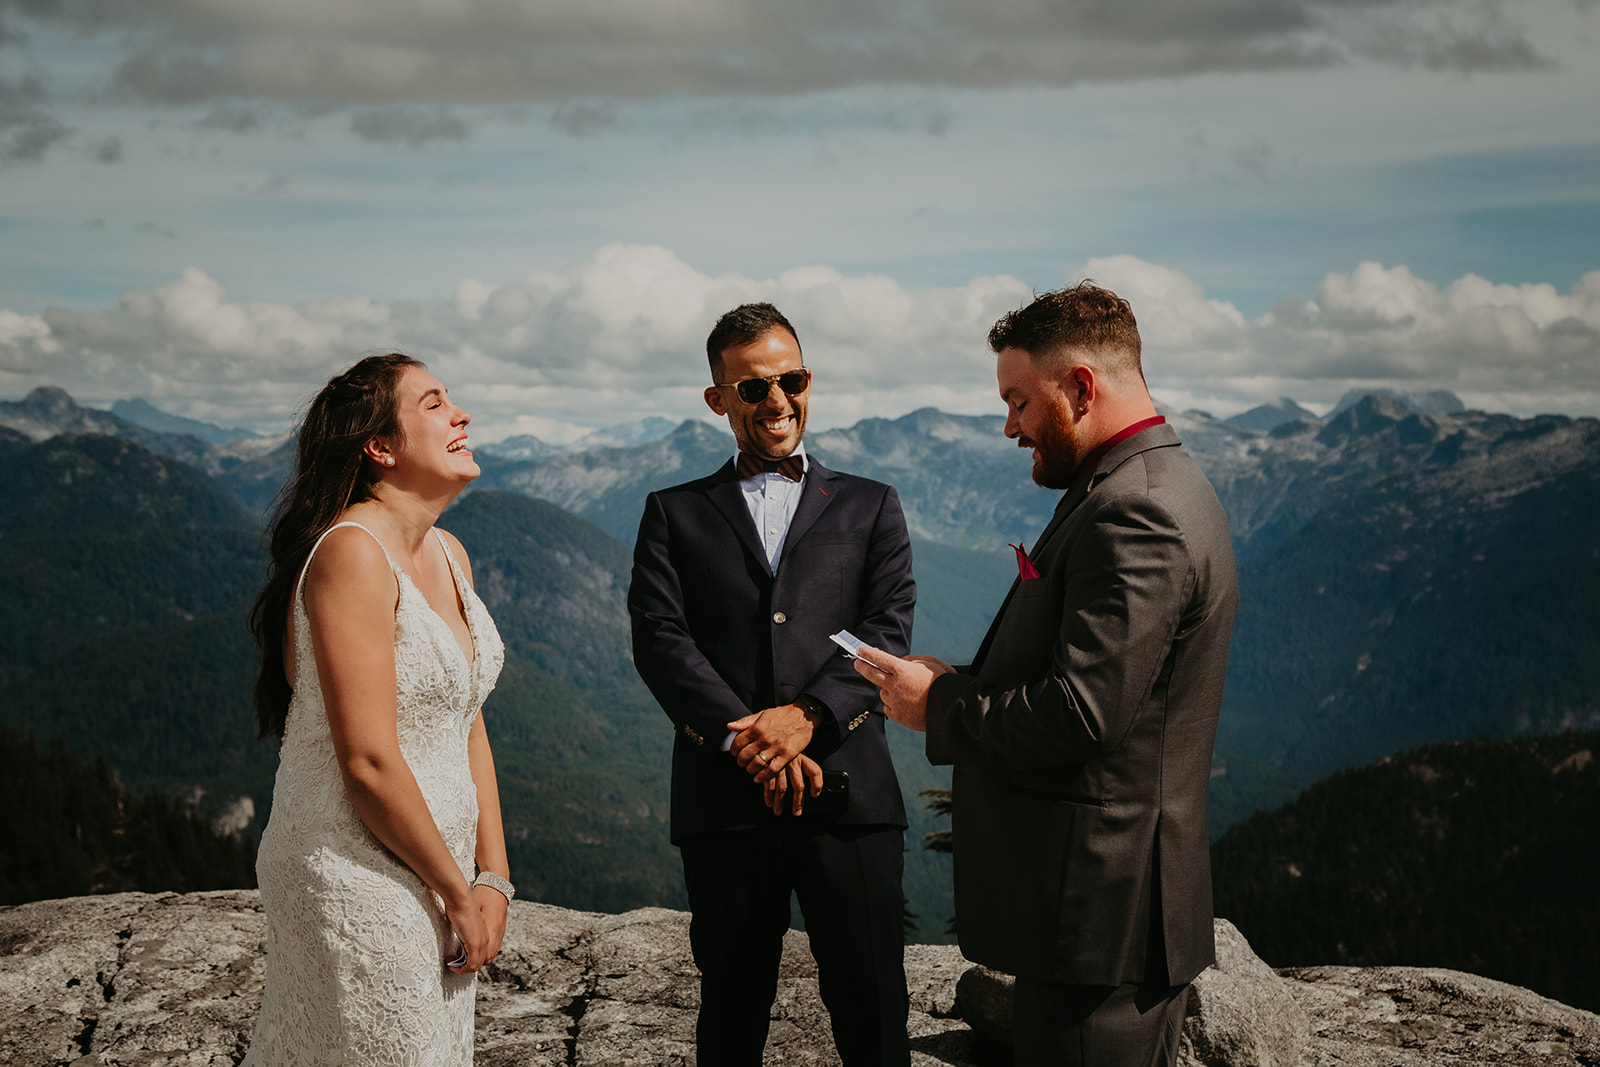 Wedding officiant Stevan at a helicopter elopement in Vancouver 